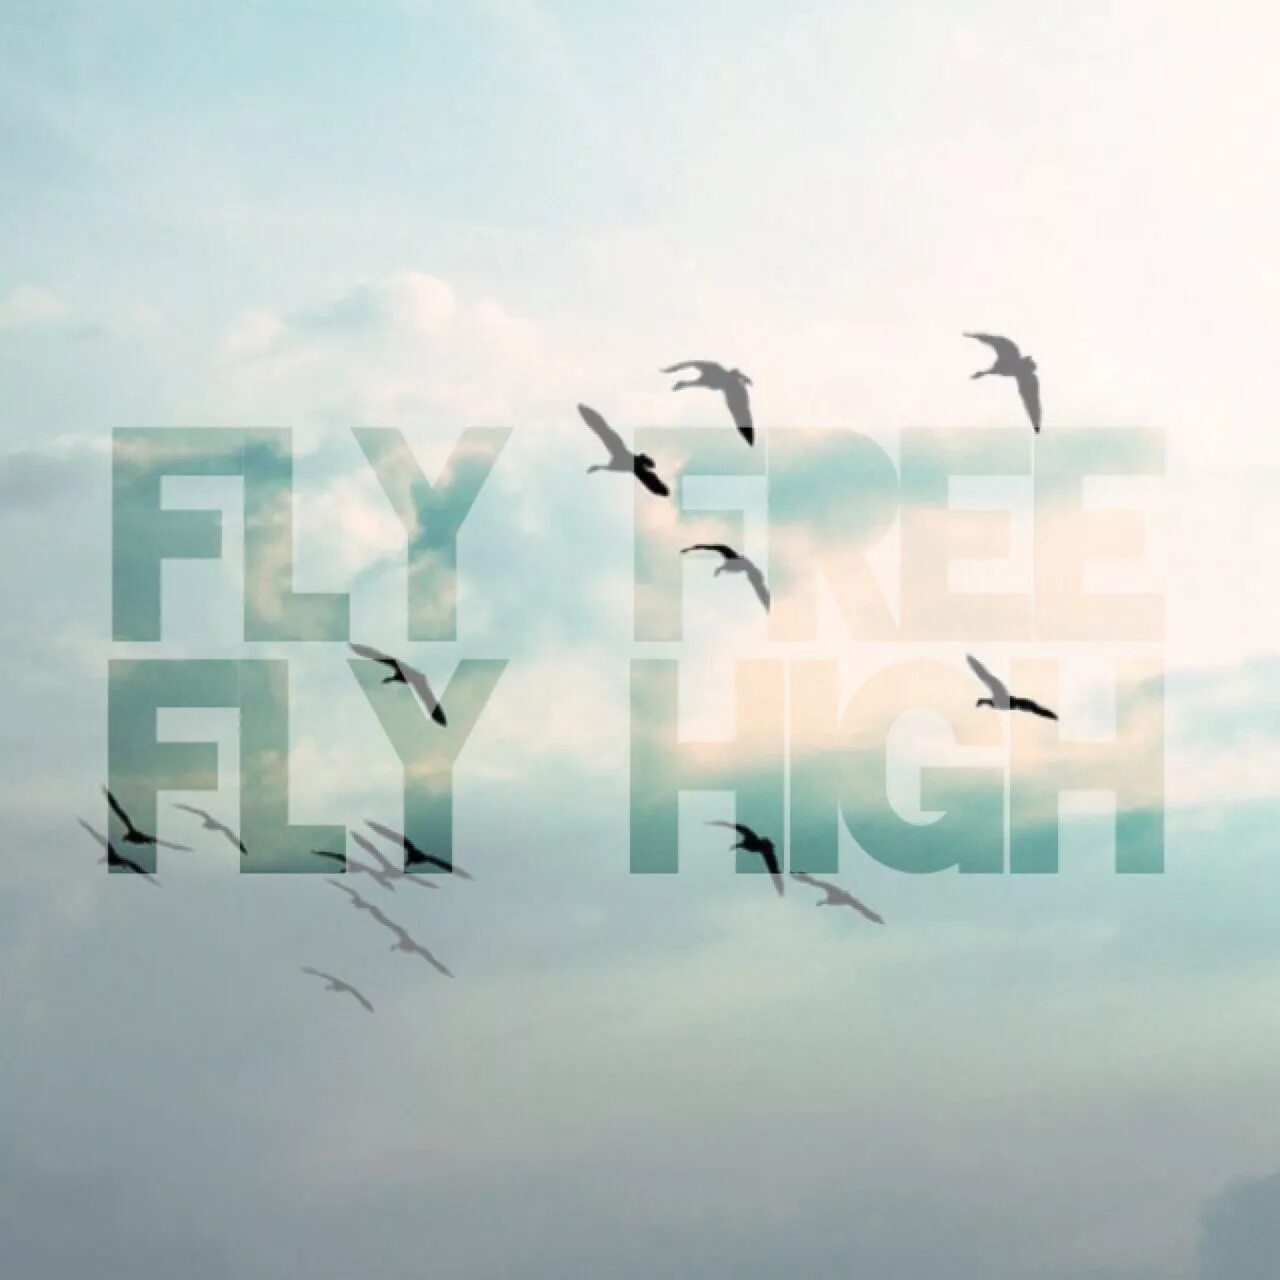 Fly High. Fly High 1. Fly quotes. Fly High 4.